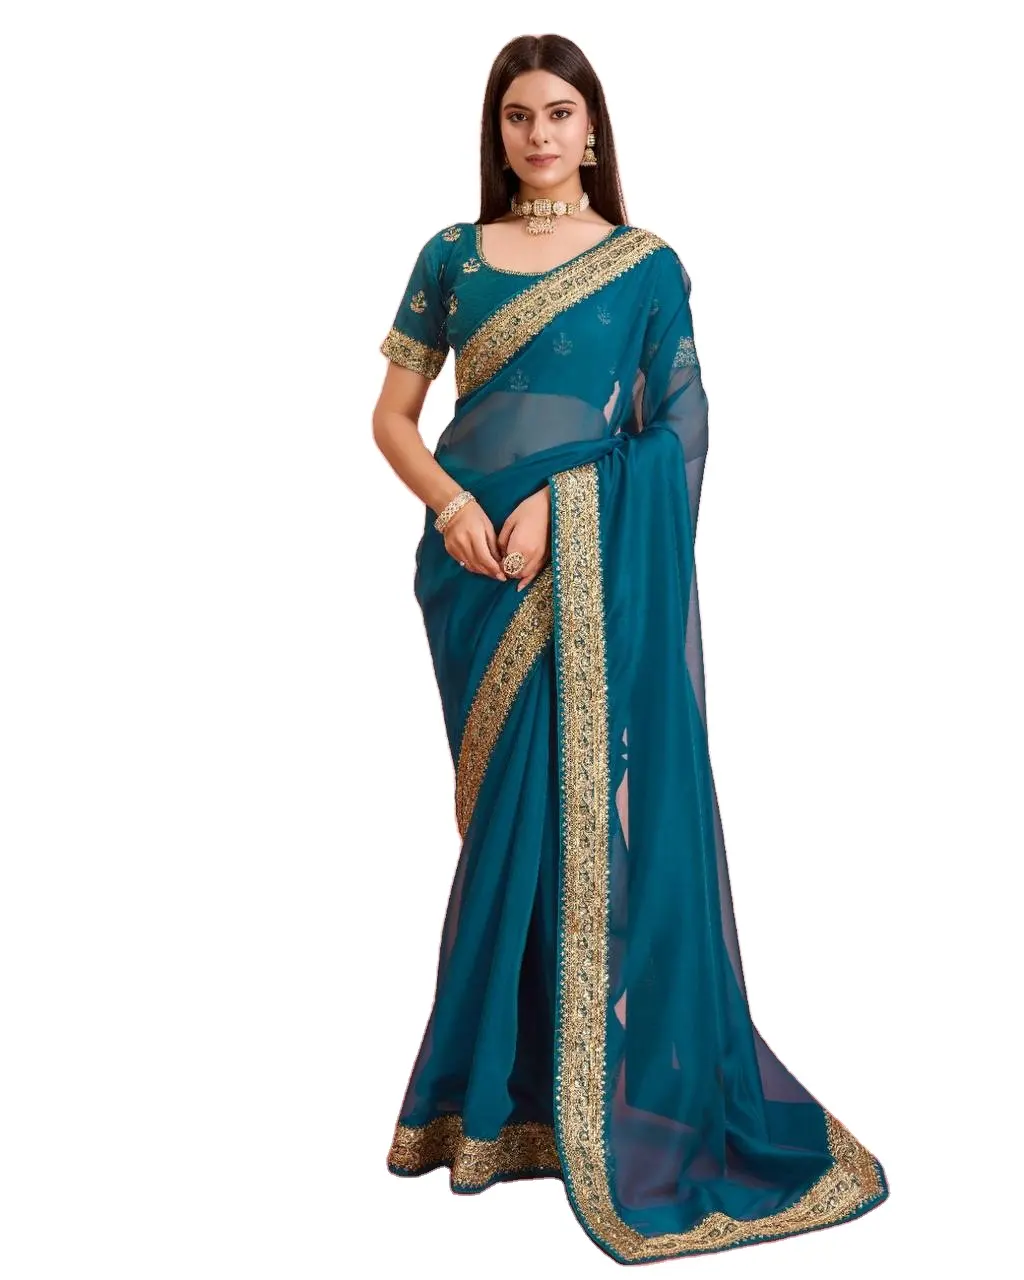 Latest Hot Selling Wedding and Festival Wear Bridal Silk Saree for Women Wedding and Party Wear